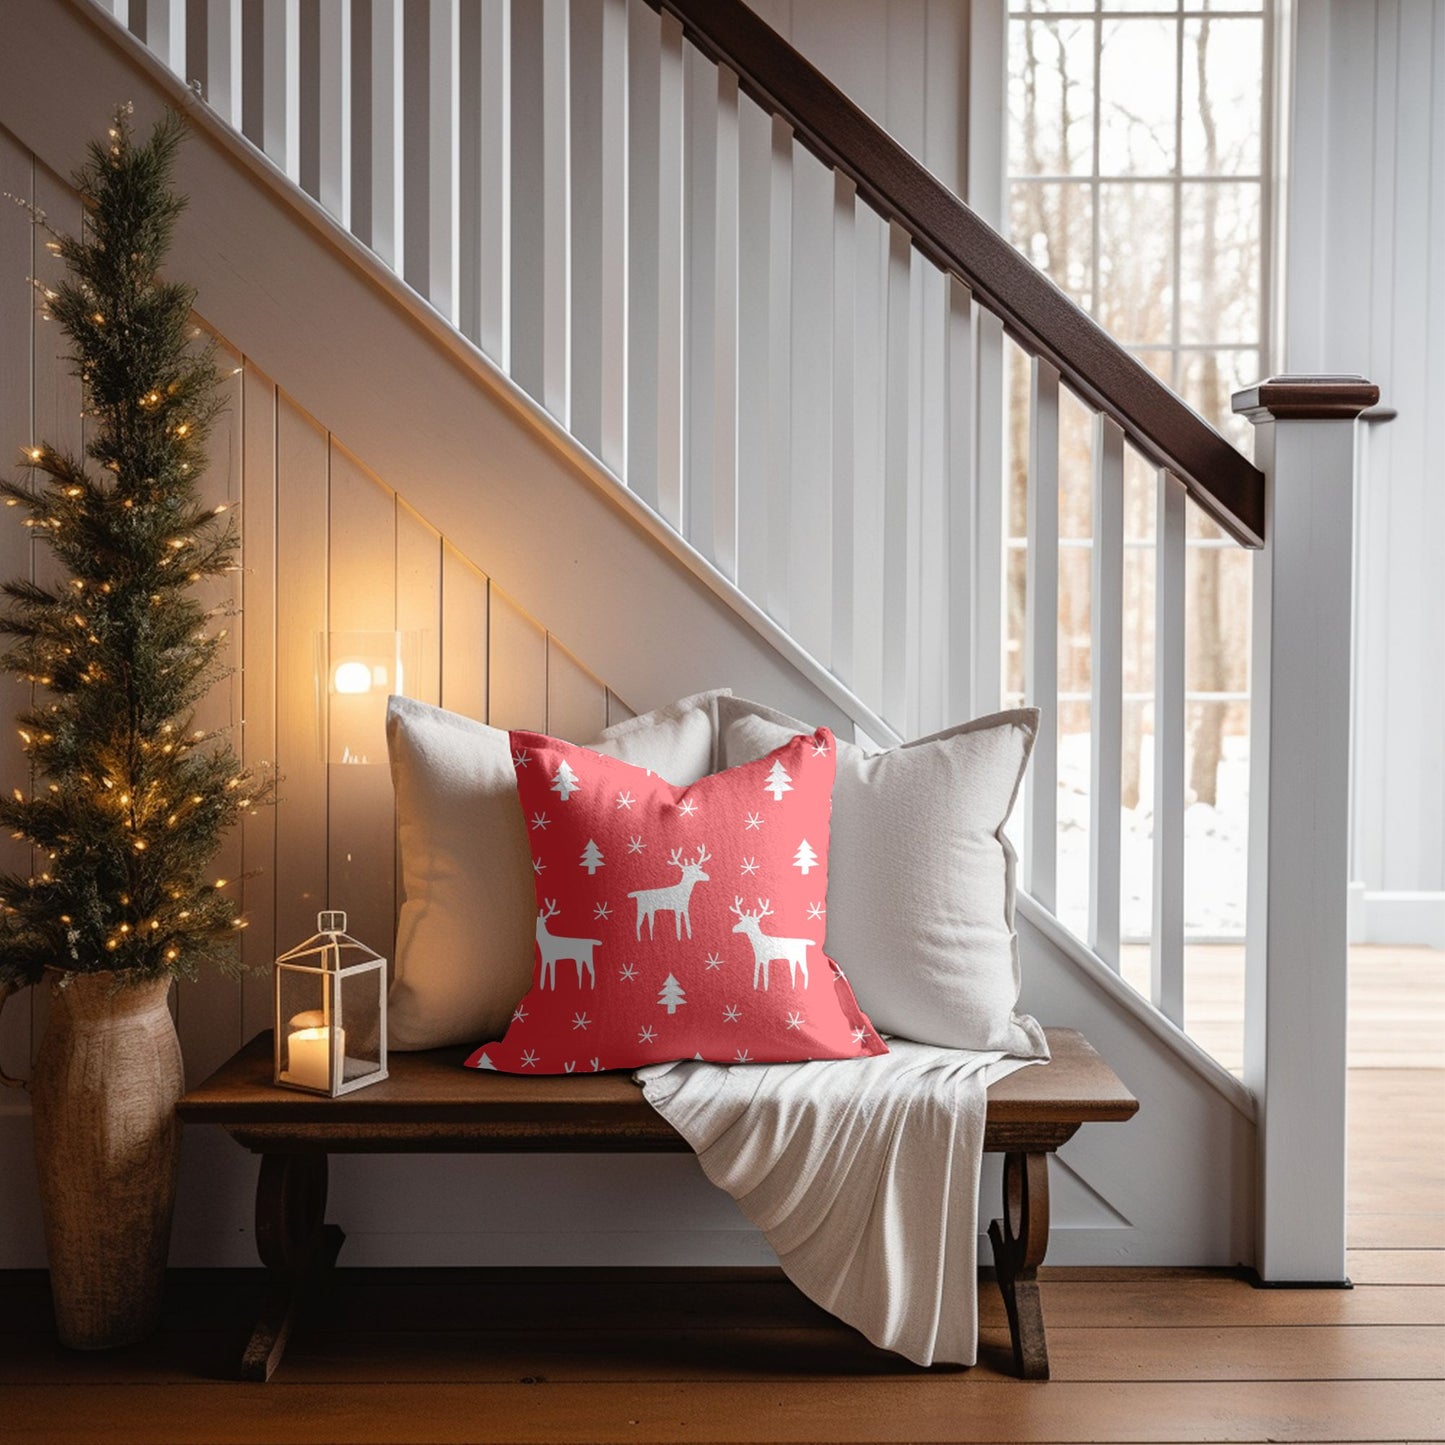 Whimsical Red Christmas Illustration on the Pillow